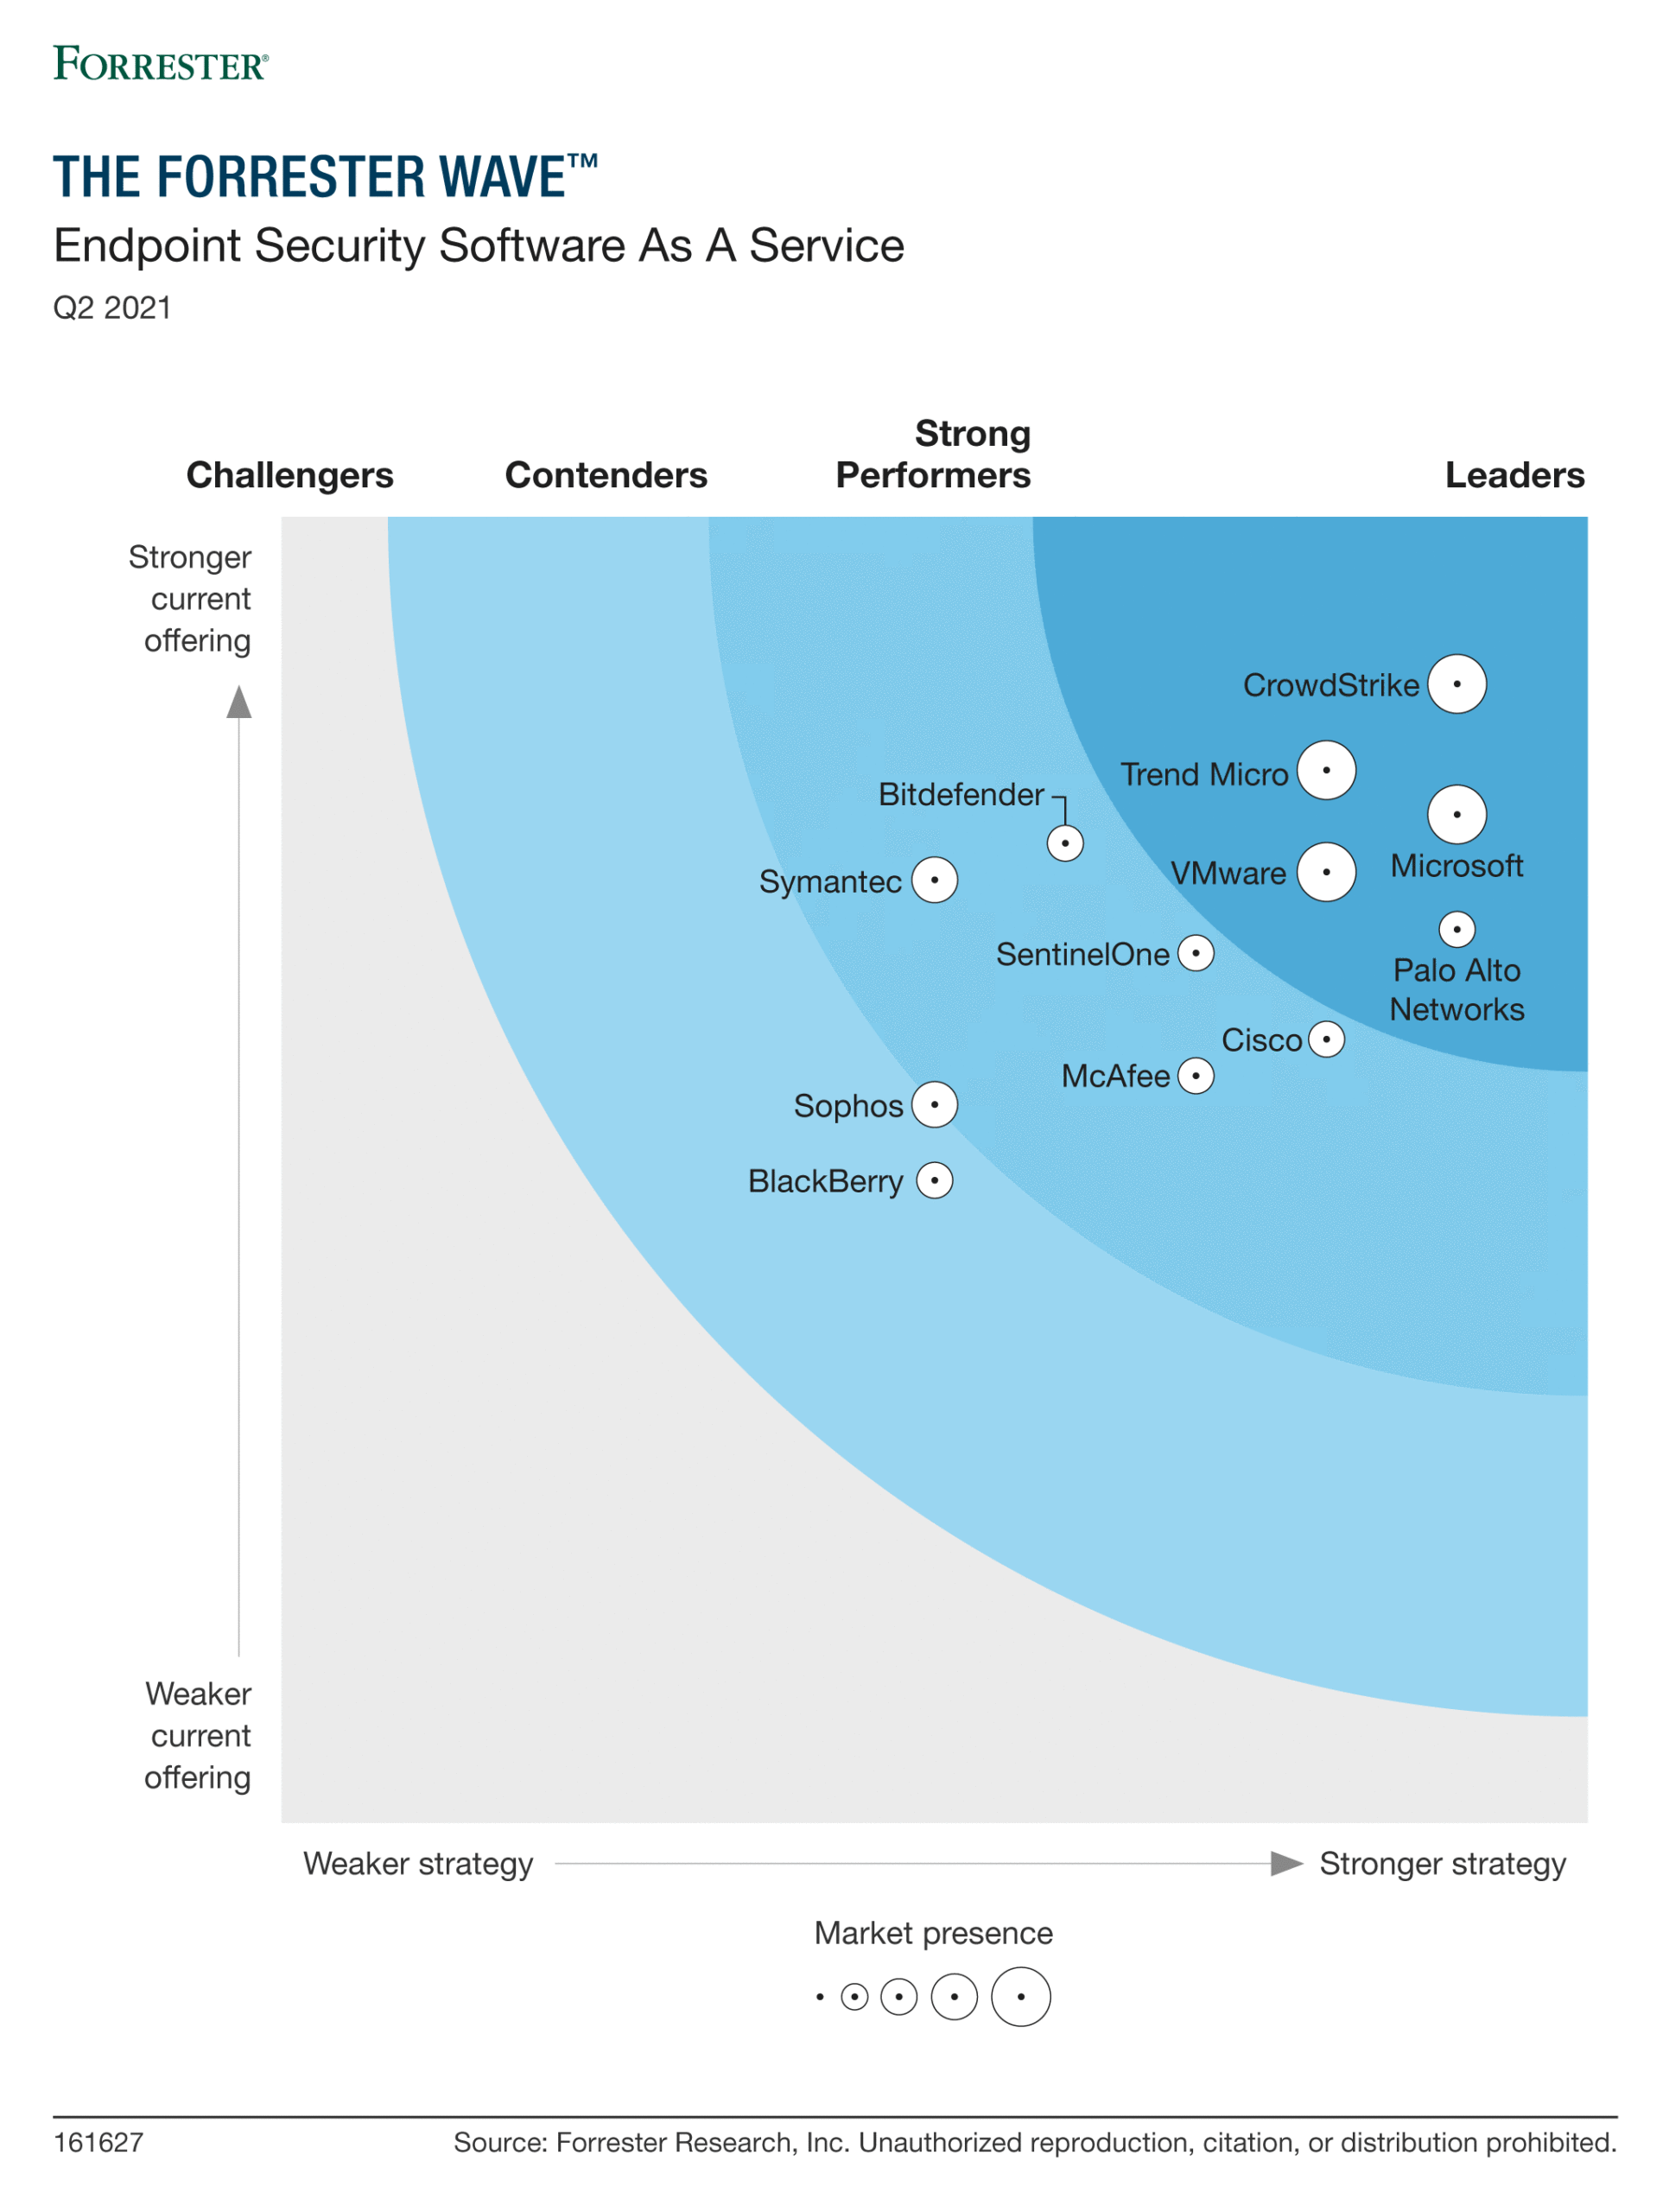 The Forrester WaveTM: Endpoint Security as a Service, Q2 2021 graphic showing Microsoft in the Leaders space.